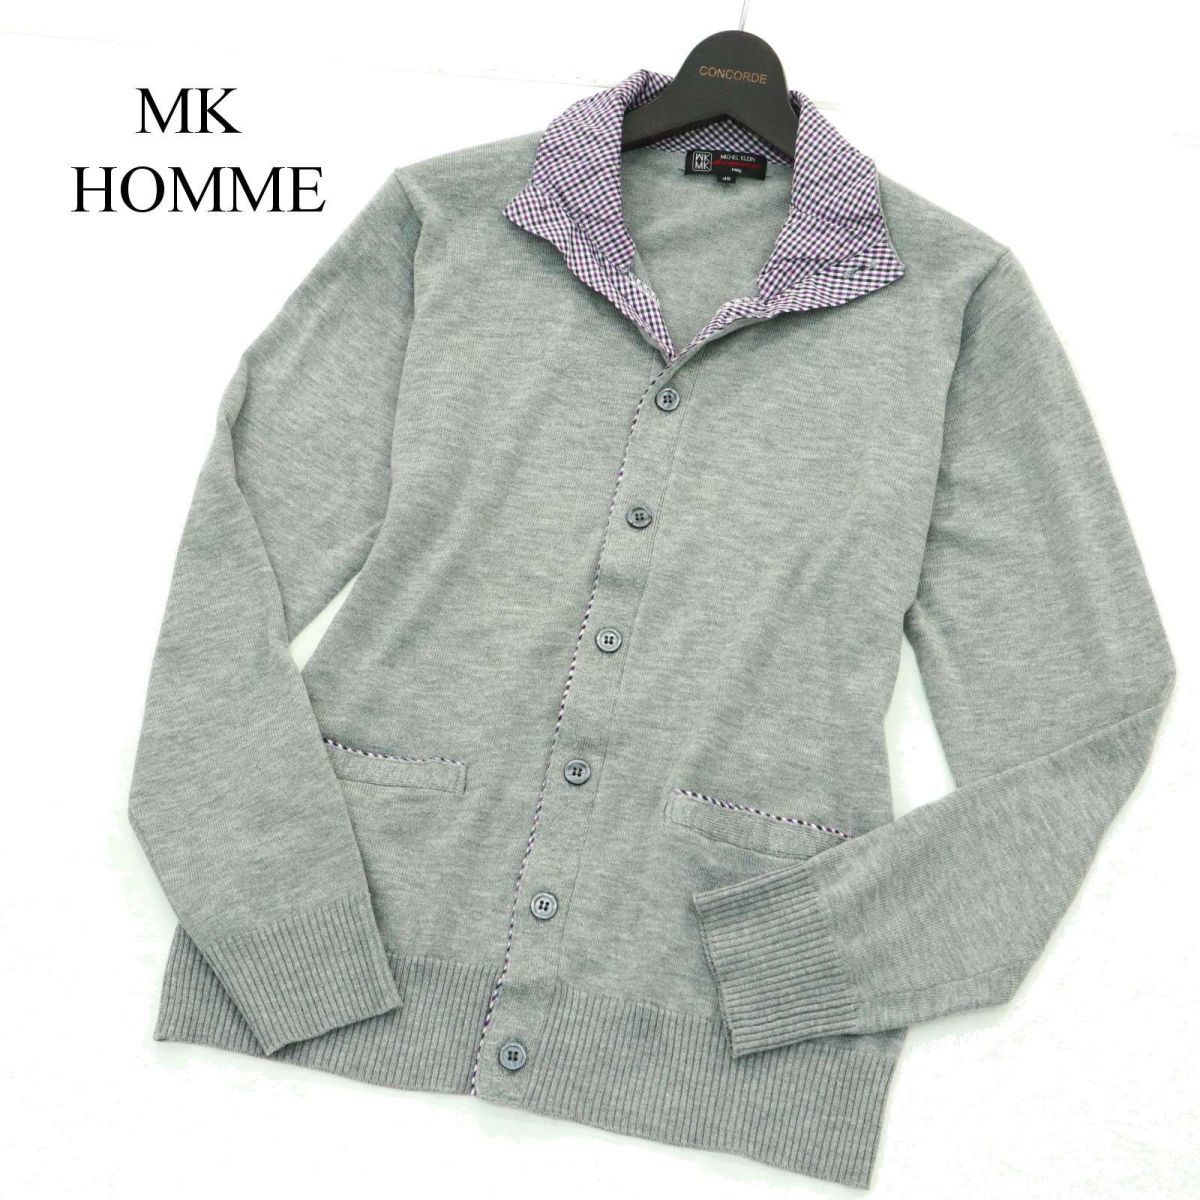 MK HOMME Michel Klein Homme through year check using * stand-up collar knitted cardigan Sz.48 men's gray A3T11429_A#O